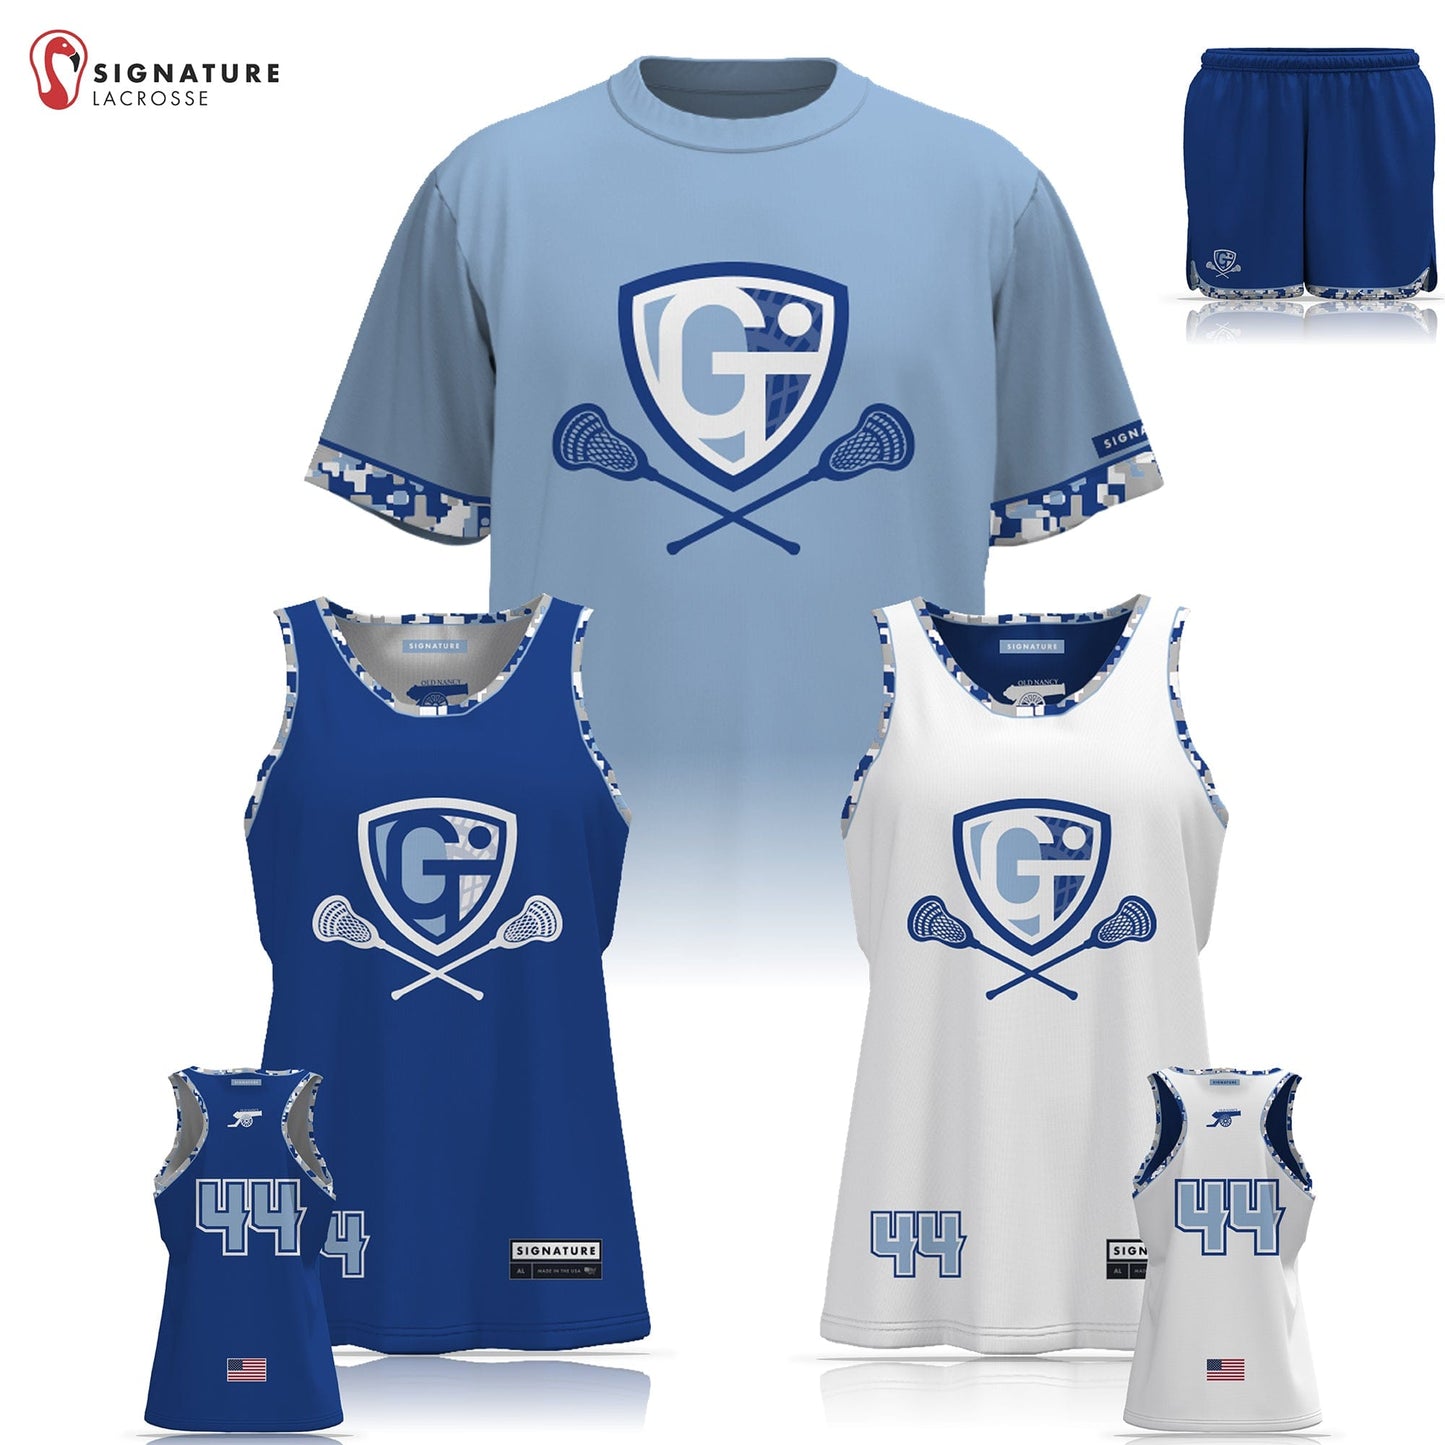 Georgetown-Triton Youth Lacrosse Women's 3 Piece Player Game Package: 5-6 Signature Lacrosse